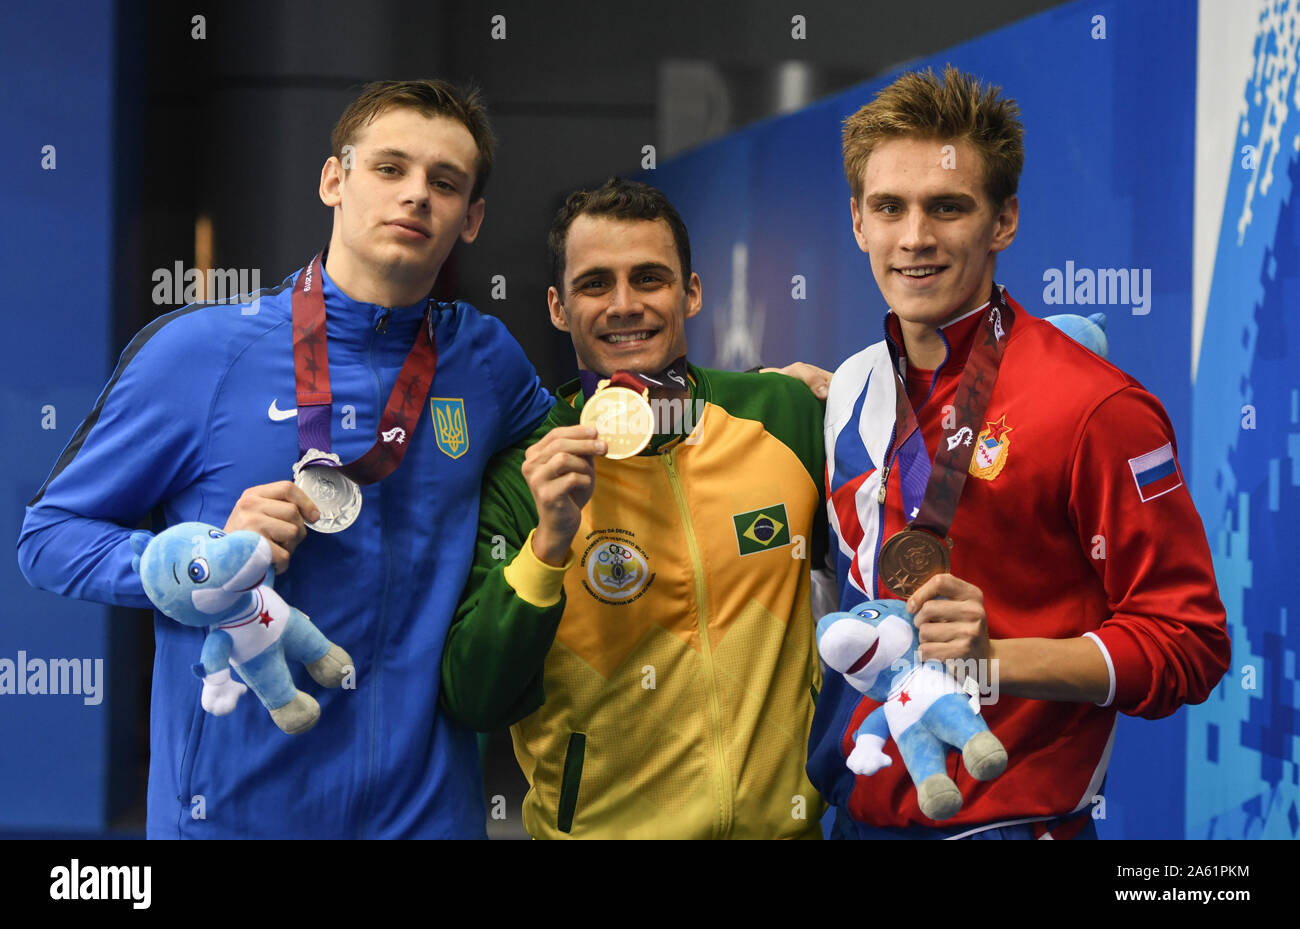 Wuhan, China's Hubei Province. 23rd Oct, 2019. Gold medalist Leonardo De Deus (C) of Brazil, silver medalist Denys Kesil (L) of Ukraine and bronze medalist Daniil Pakhomov of Russia attend the awarding ceremony of men's 200m butterfly final of swimming at the 7th CISM Military World Games in Wuhan, capital of central China's Hubei Province, Oct. 23, 2019. Credit: Cheng Min/Xinhua/Alamy Live News Stock Photo